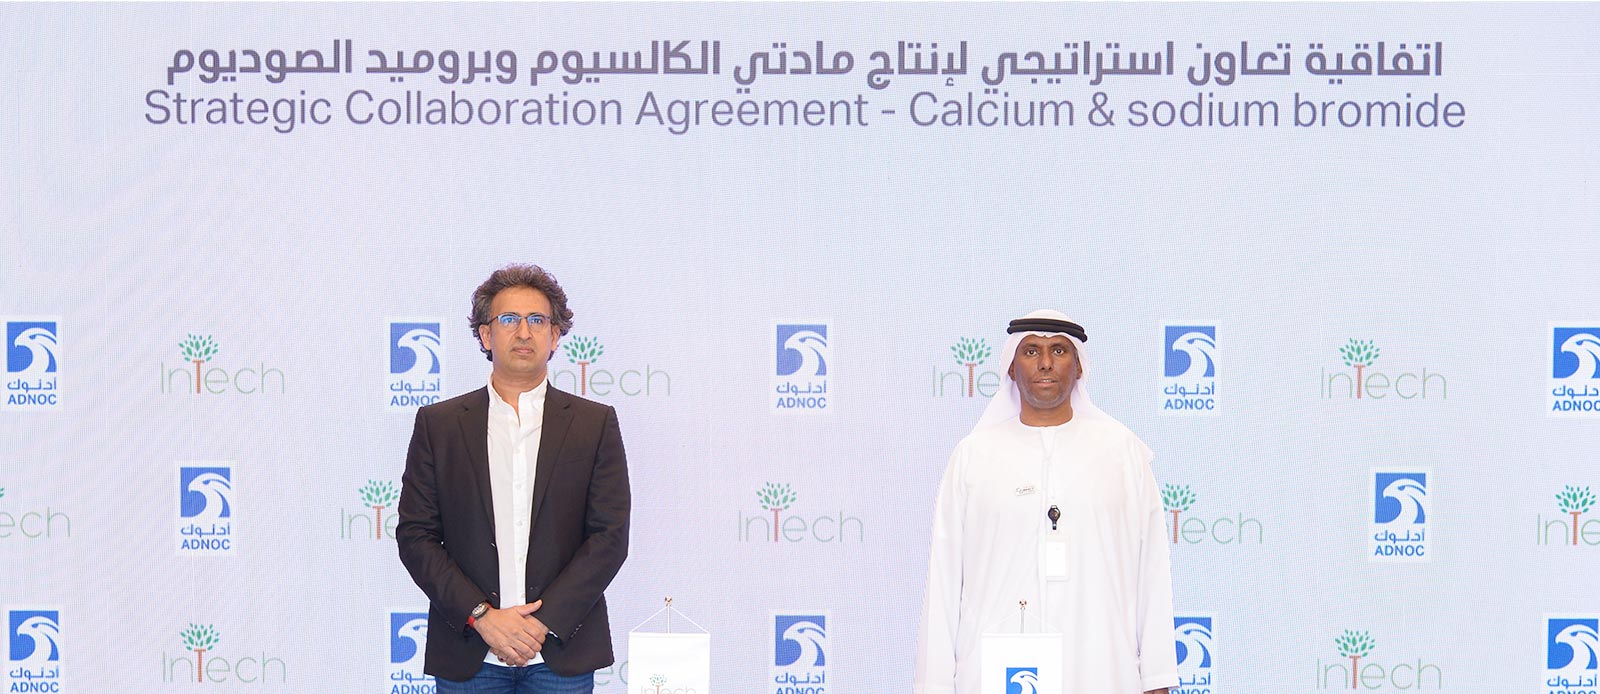 Intech Organics Partners With ADNOC to Manufacture Calcium and Sodium Bromide in the UAE